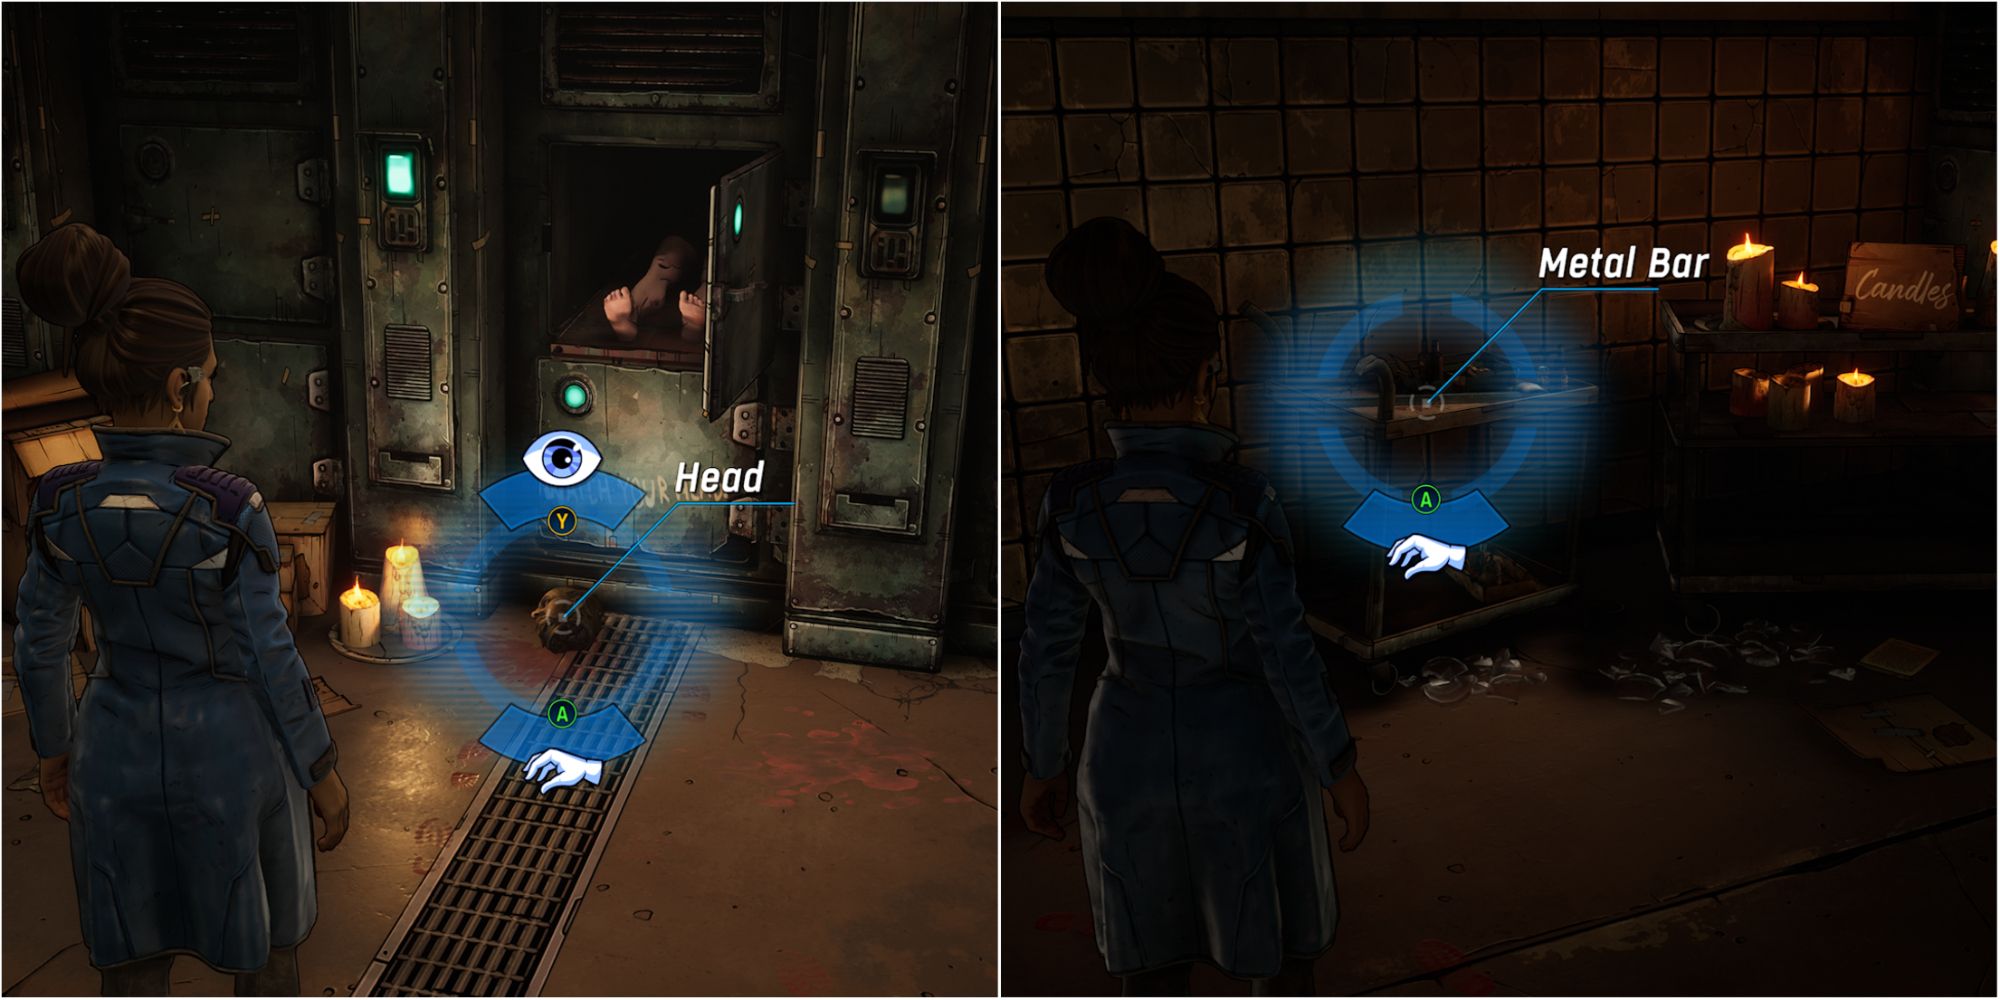 New Tales From The Borderlands Split Image Head And Metal Bar Locations